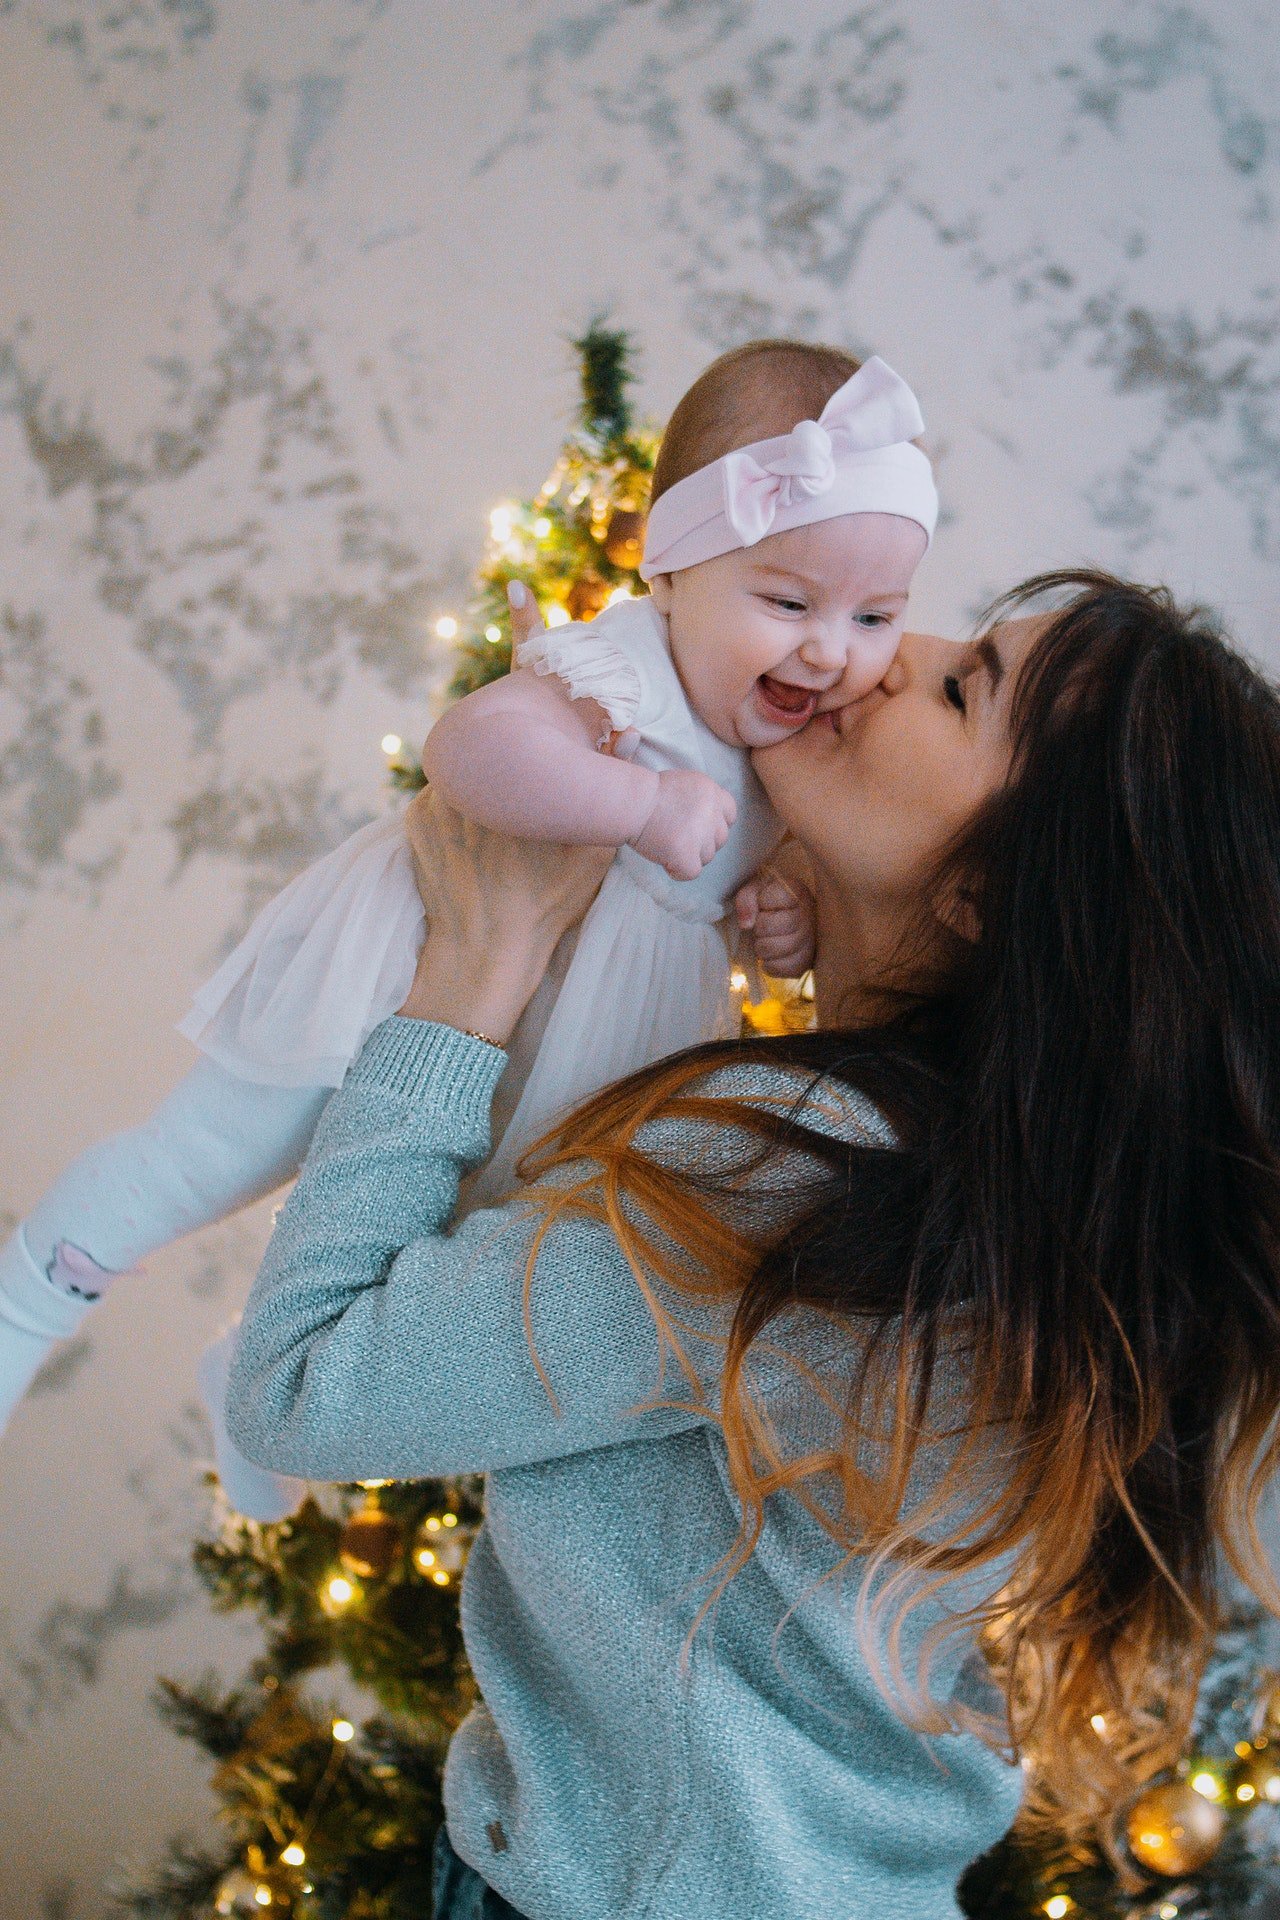 Christina stayed with Camila, who was the best aunt ever. | Source: Pexels